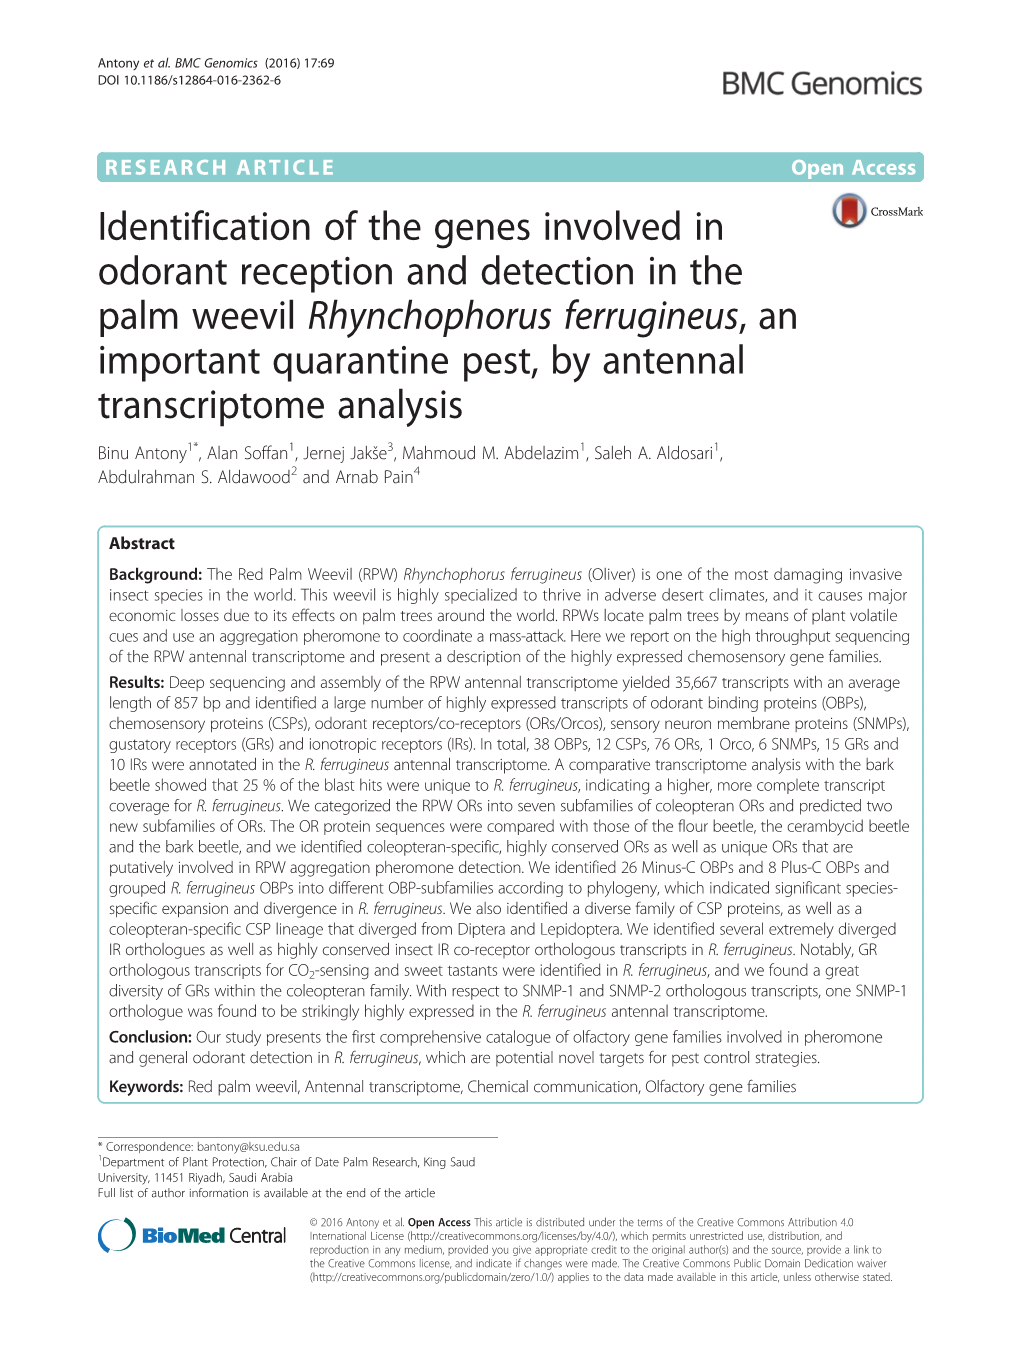 Identification of the Genes Involved in Odorant Reception and Detection In